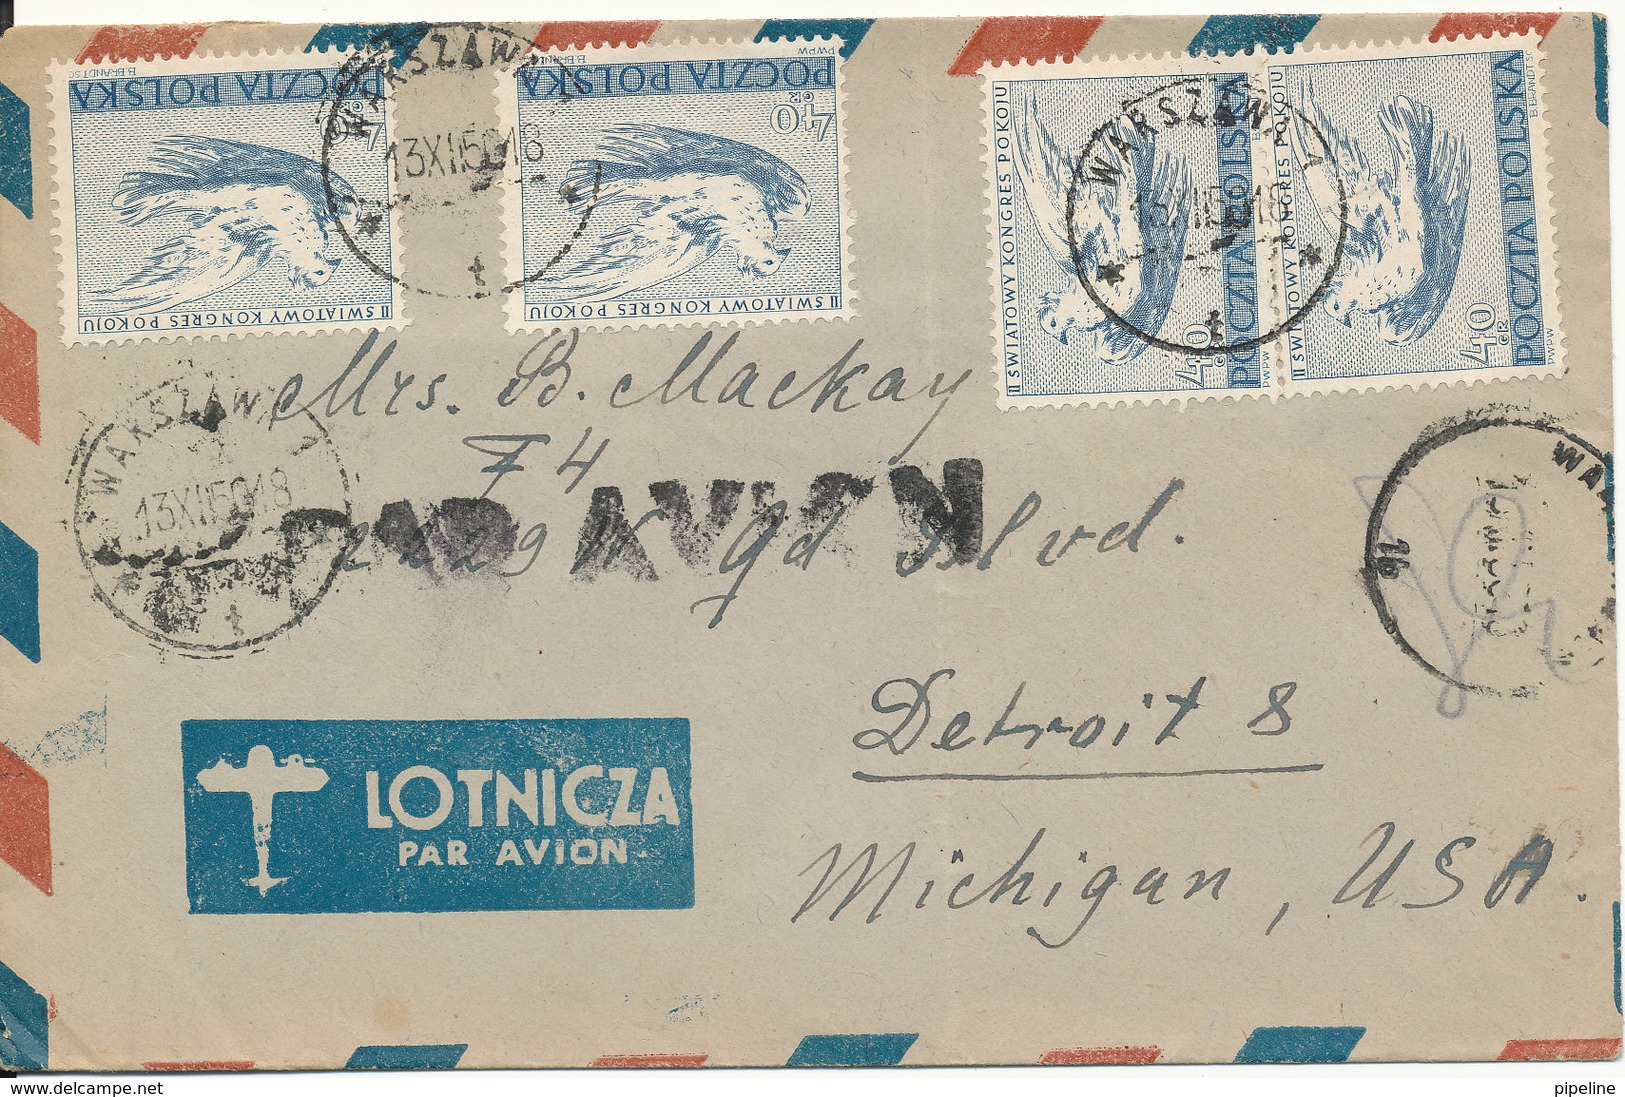 Poland Air Mail Cover Sent To USA 13-12-1950 - Airplanes